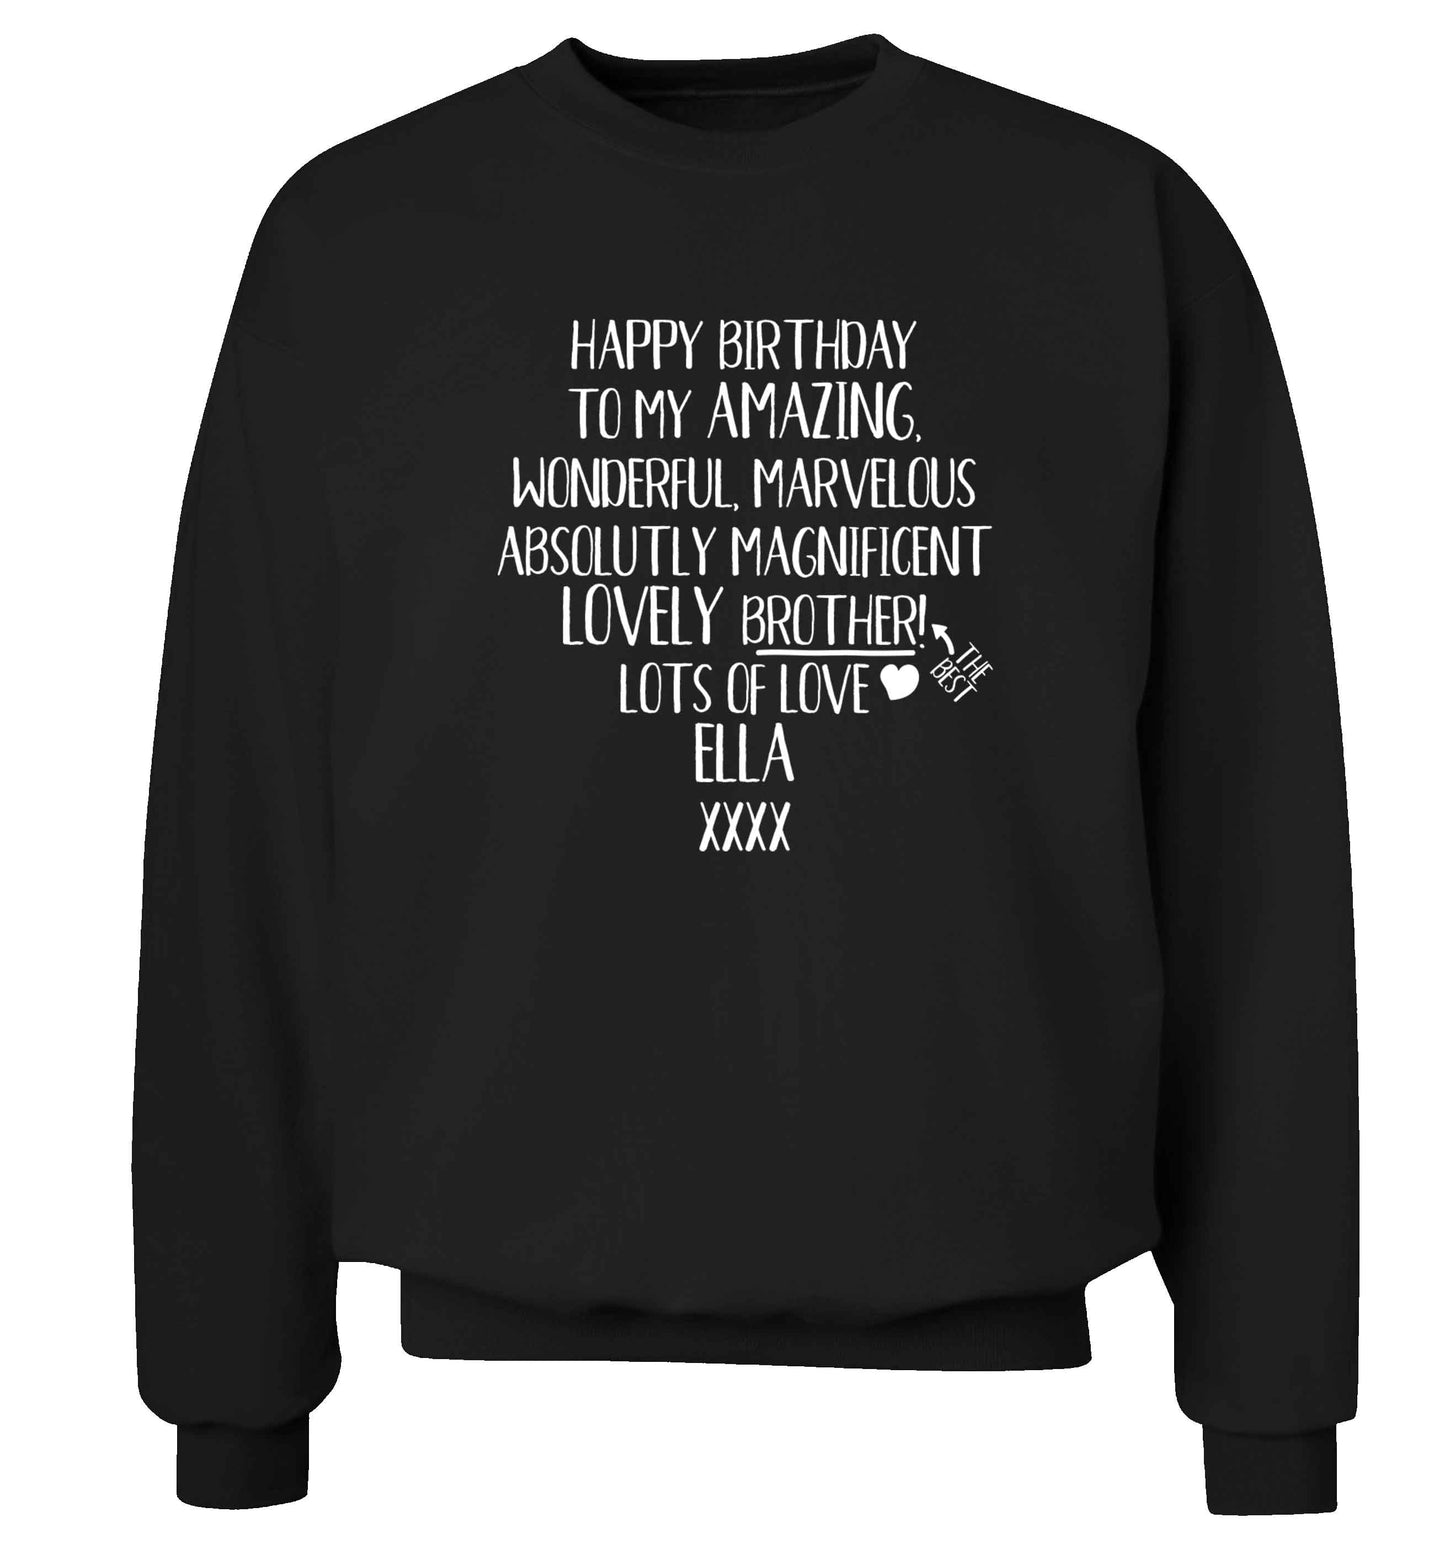 Personalised happy birthday to my amazing, wonderful, lovely brother Adult's unisex black Sweater 2XL